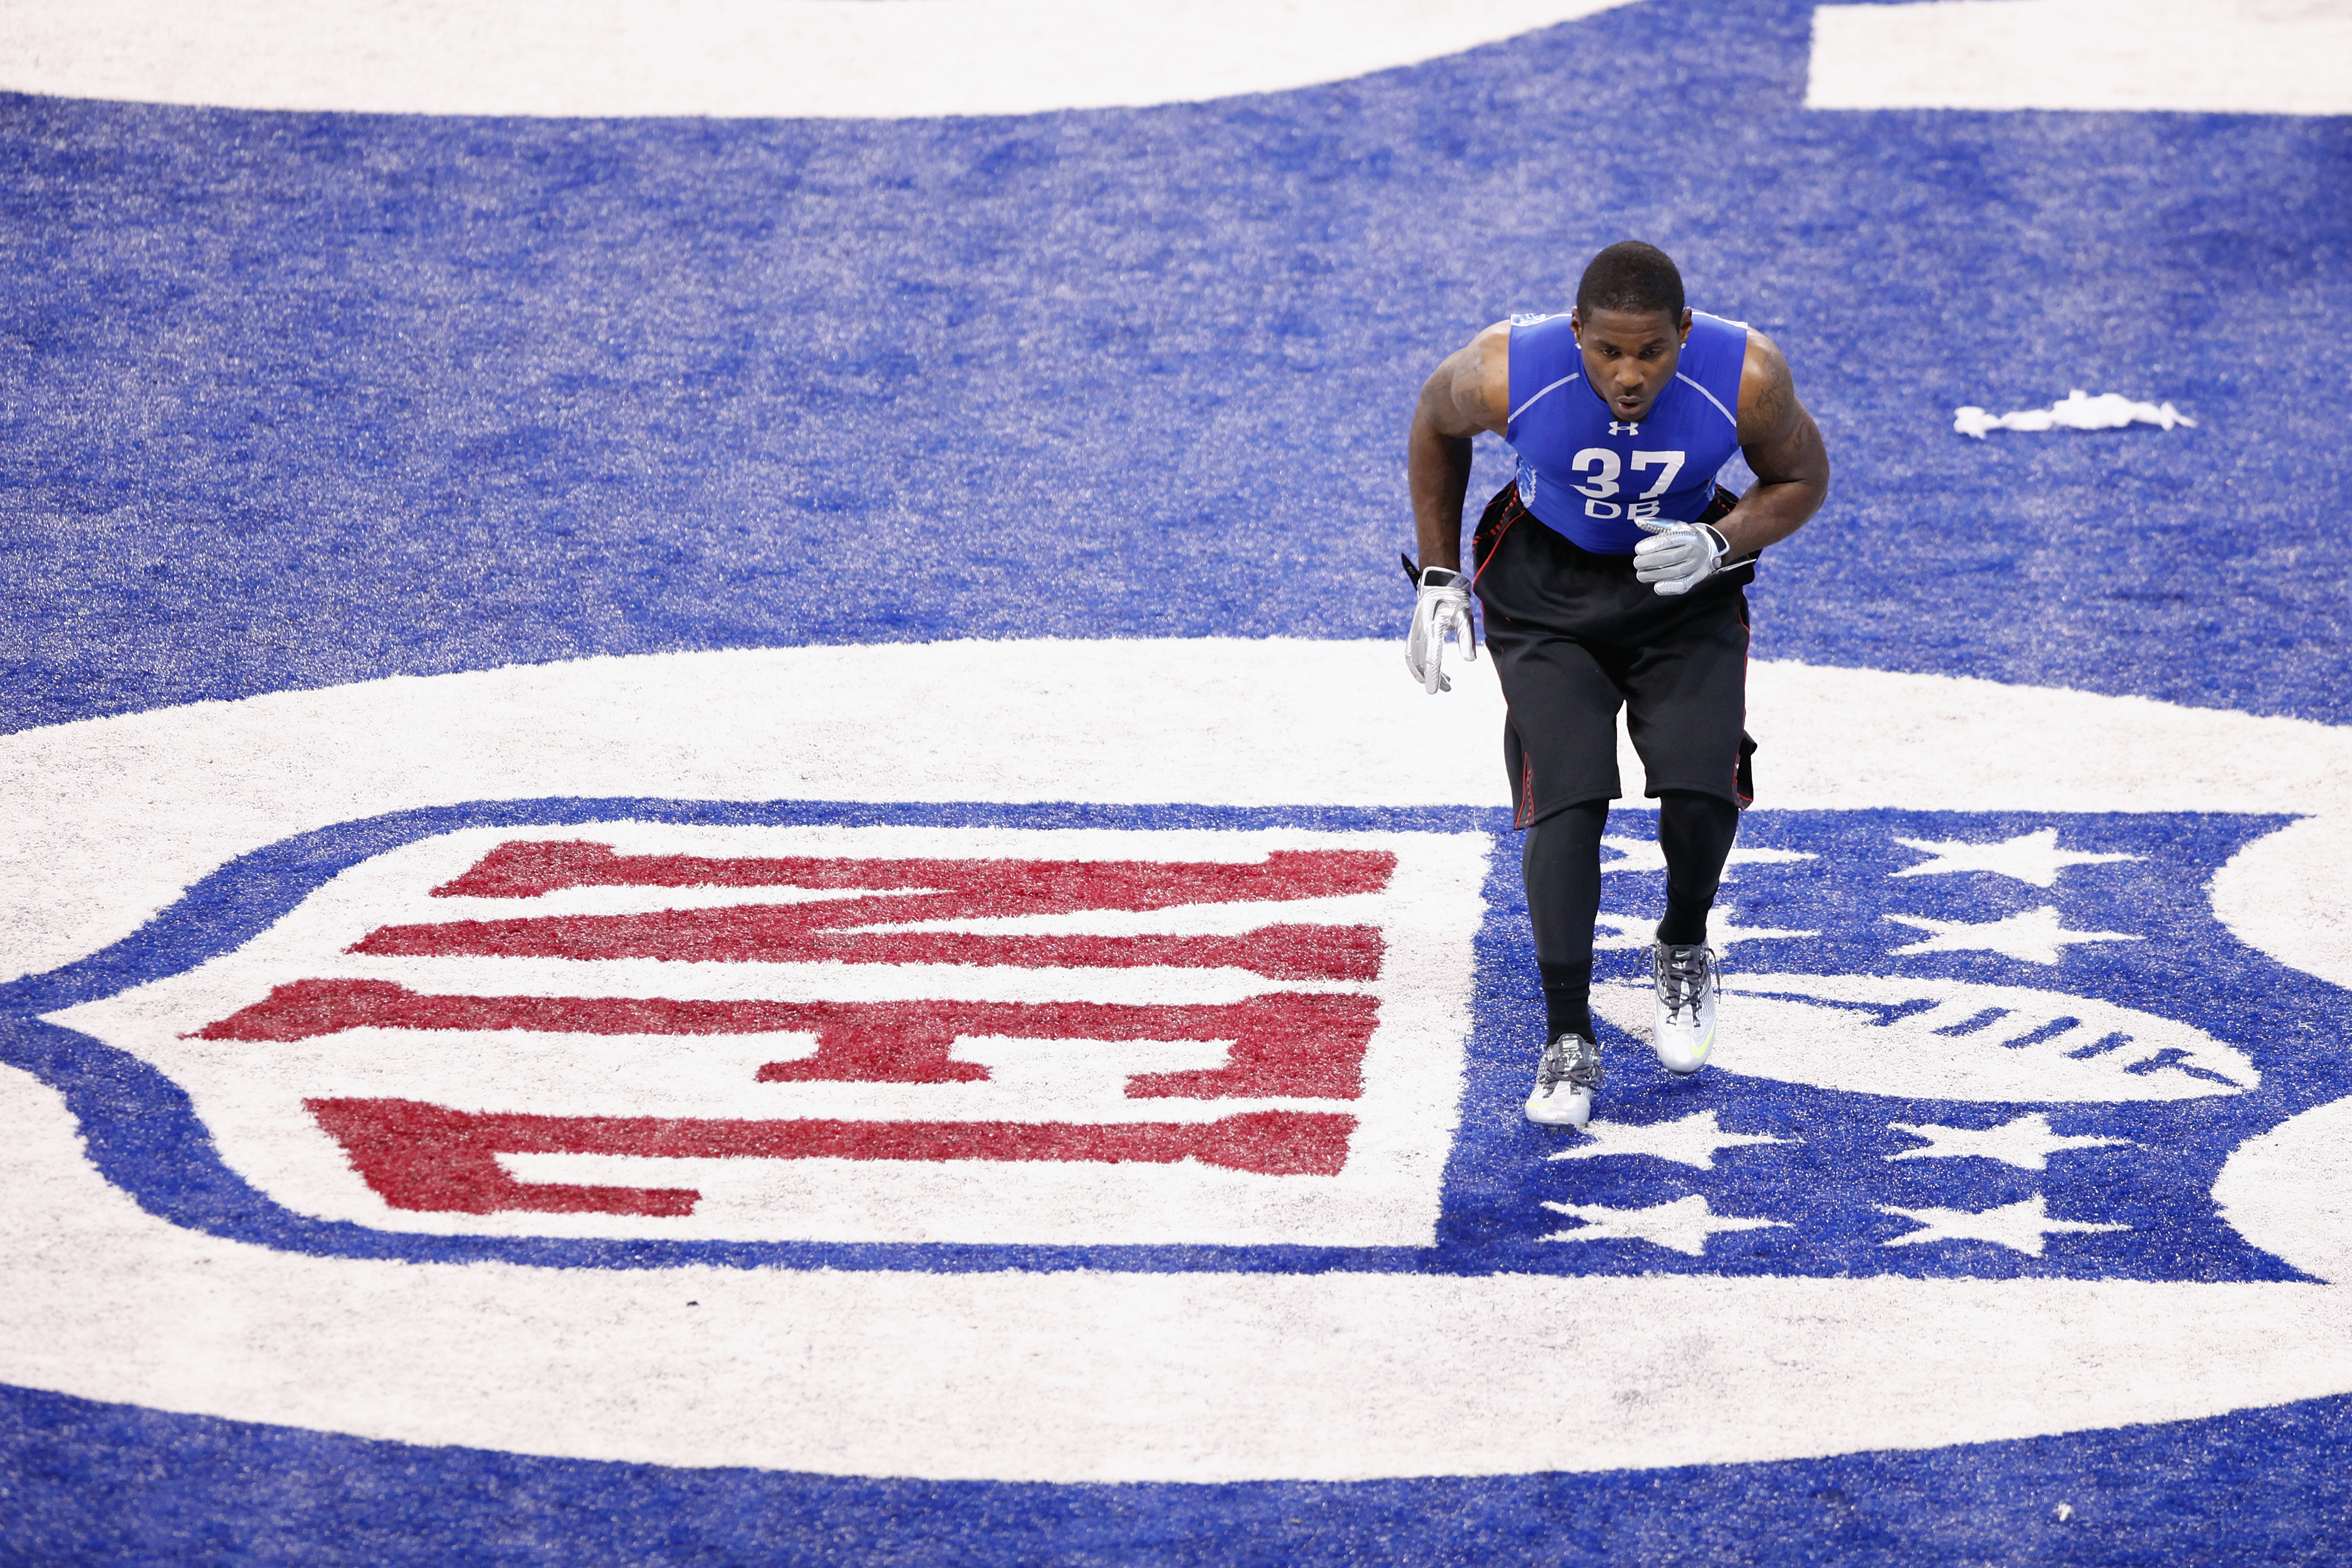 INDIANAPOLIS, IN - MARCH 1: Defensive back Patrick Peterson of LSU warms up before running a drill during the 2011 NFL Scouting Combine at Lucas Oil Stadium on February 28, 2011 in Indianapolis, Indiana. (Photo by Joe Robbins/Getty Images)